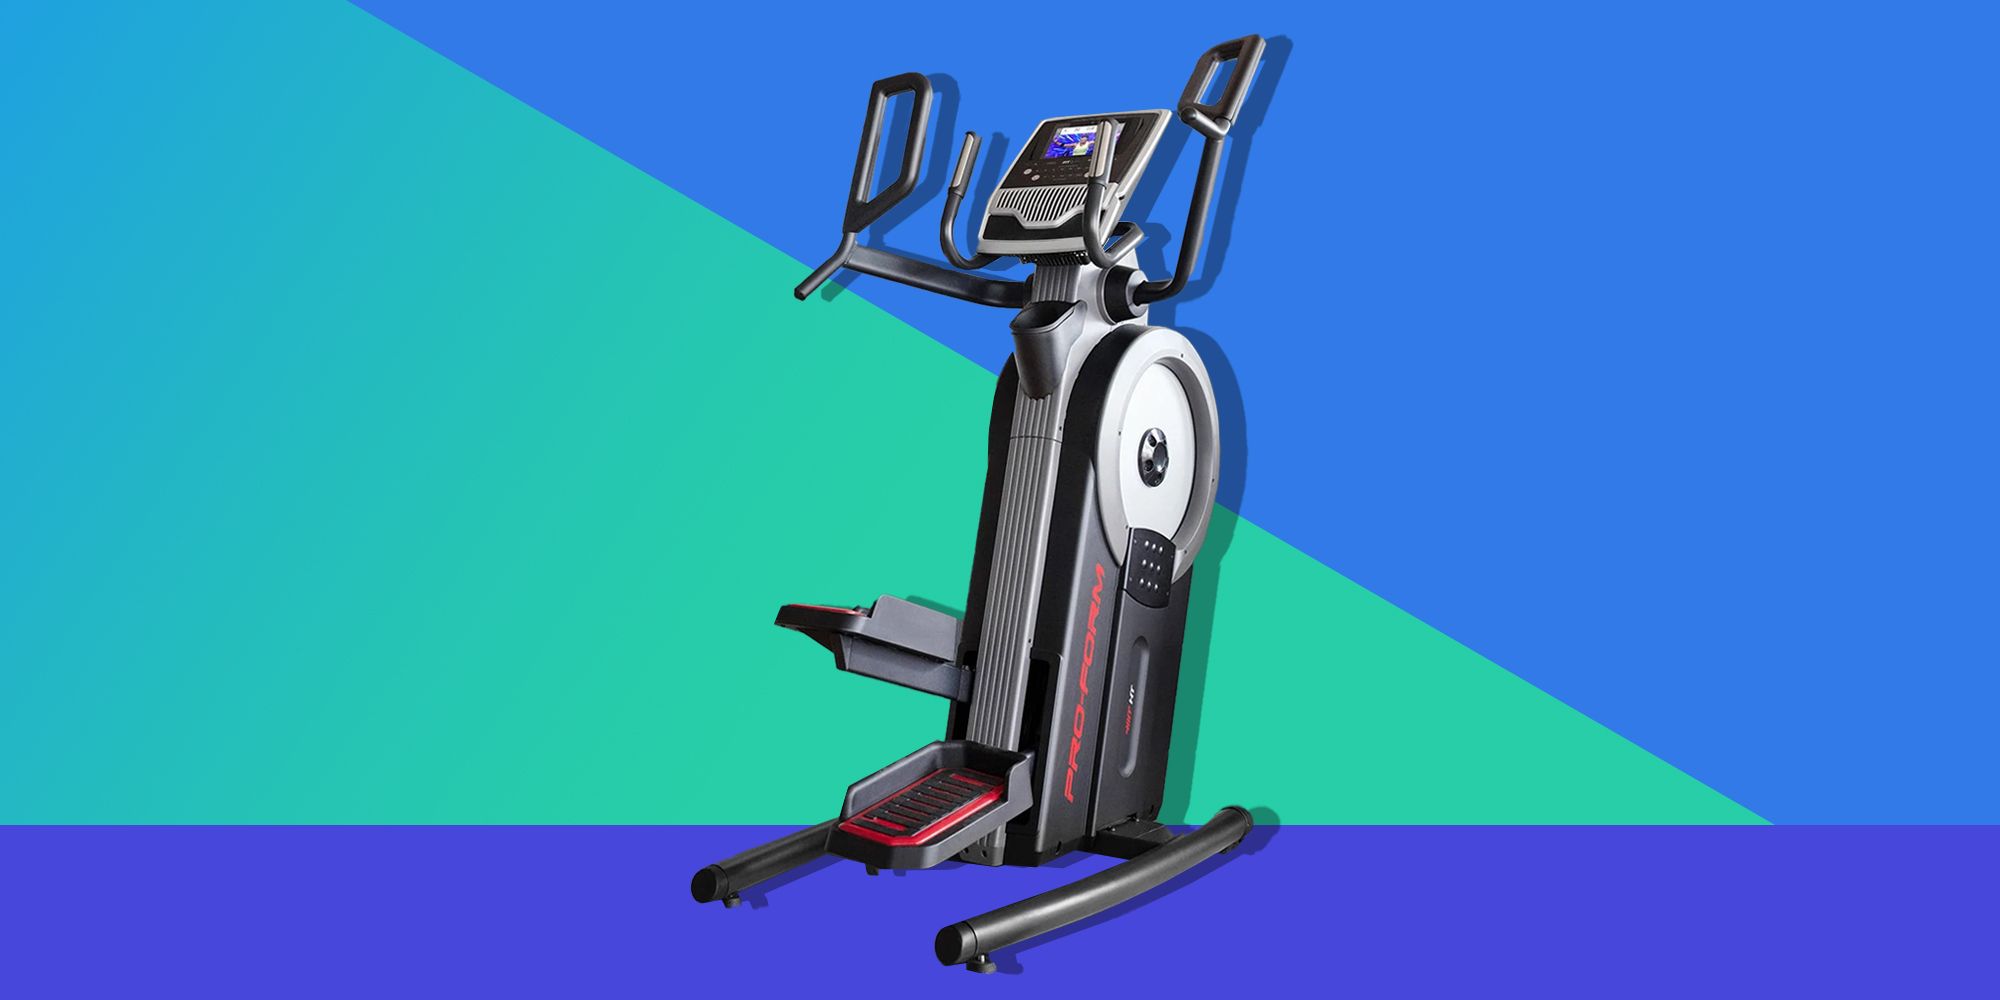 Deluxe Stepper Gym Fitness Workout Exercise Training Machine with LCD Monitor 